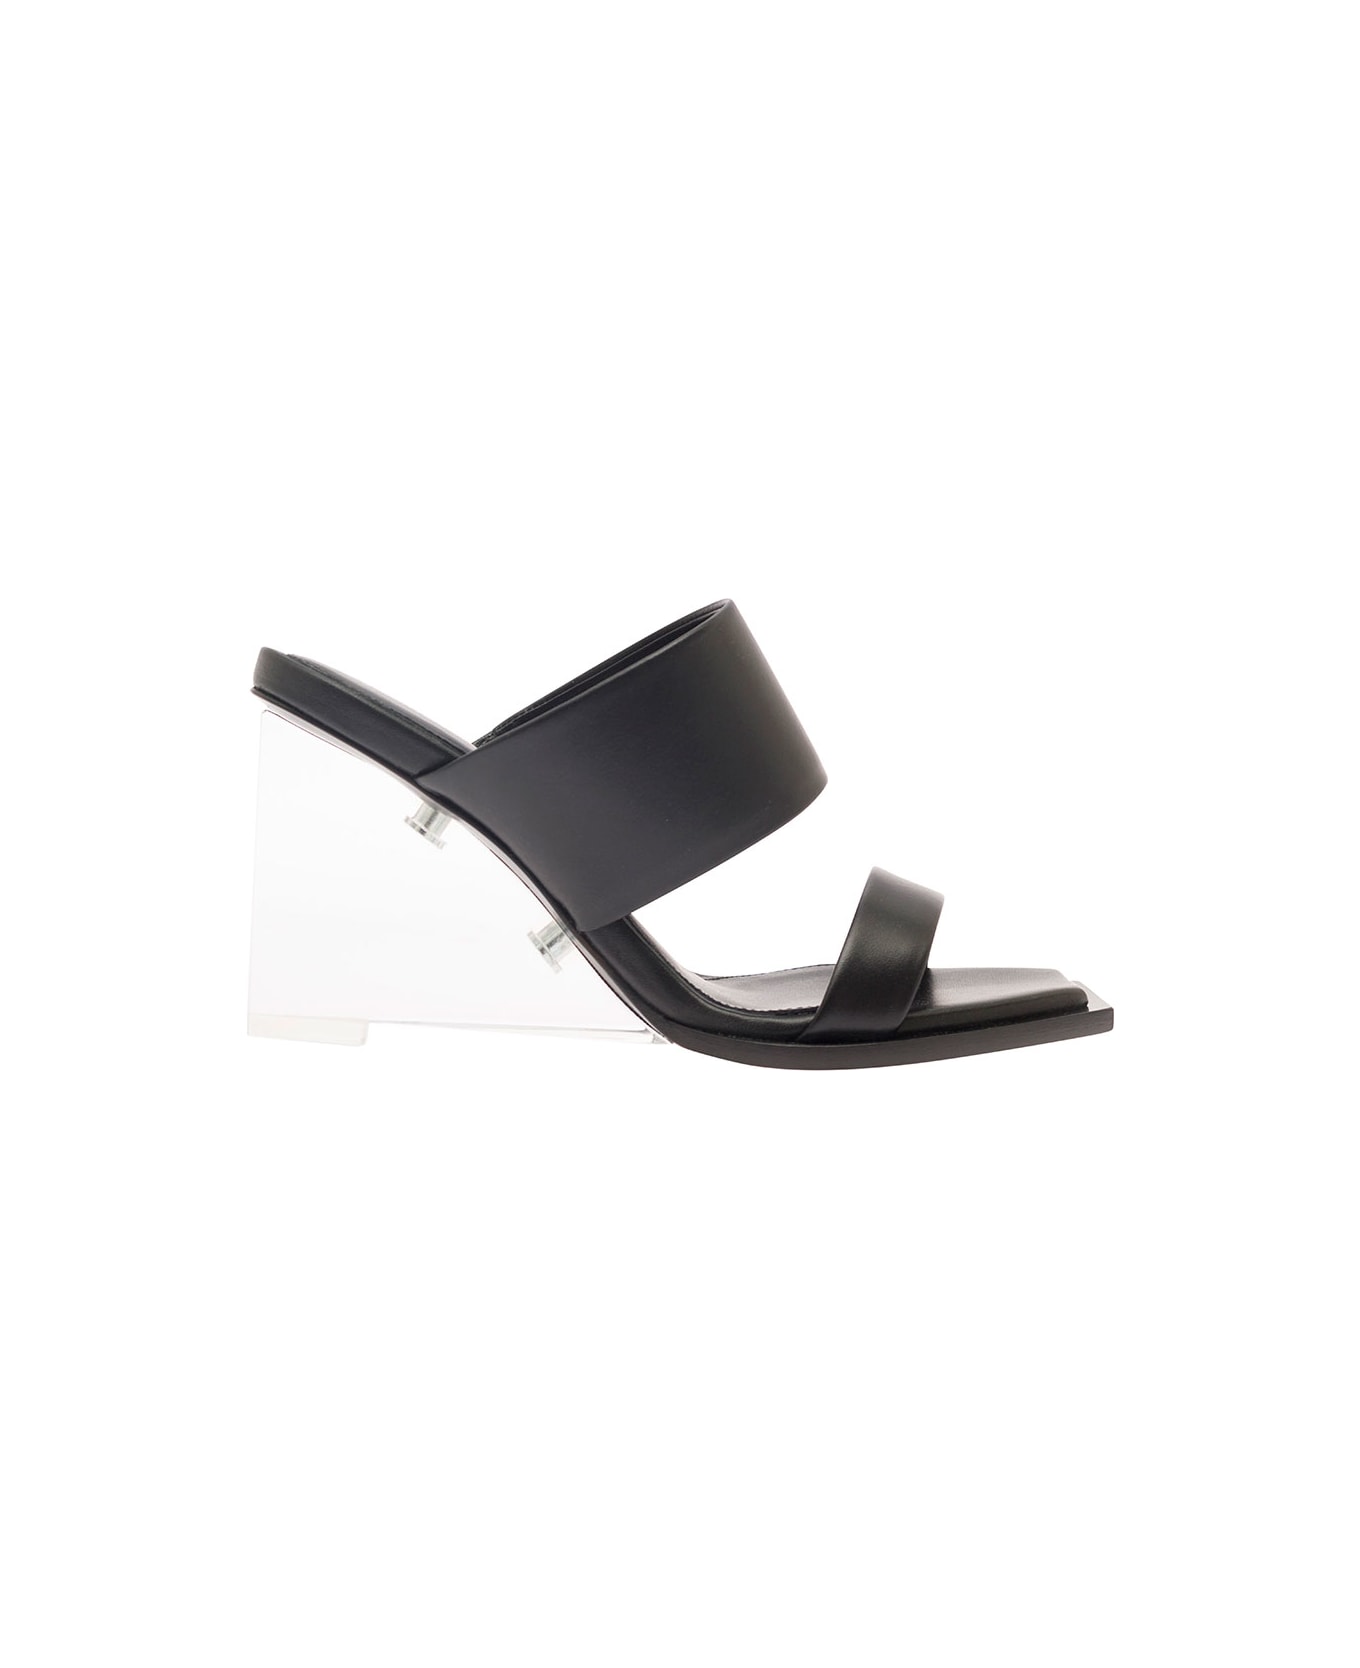 Alexander McQueen Black Wedge With Double Strap And Trasparent Plexiglass Heel In Smooth Leather Woman - Black